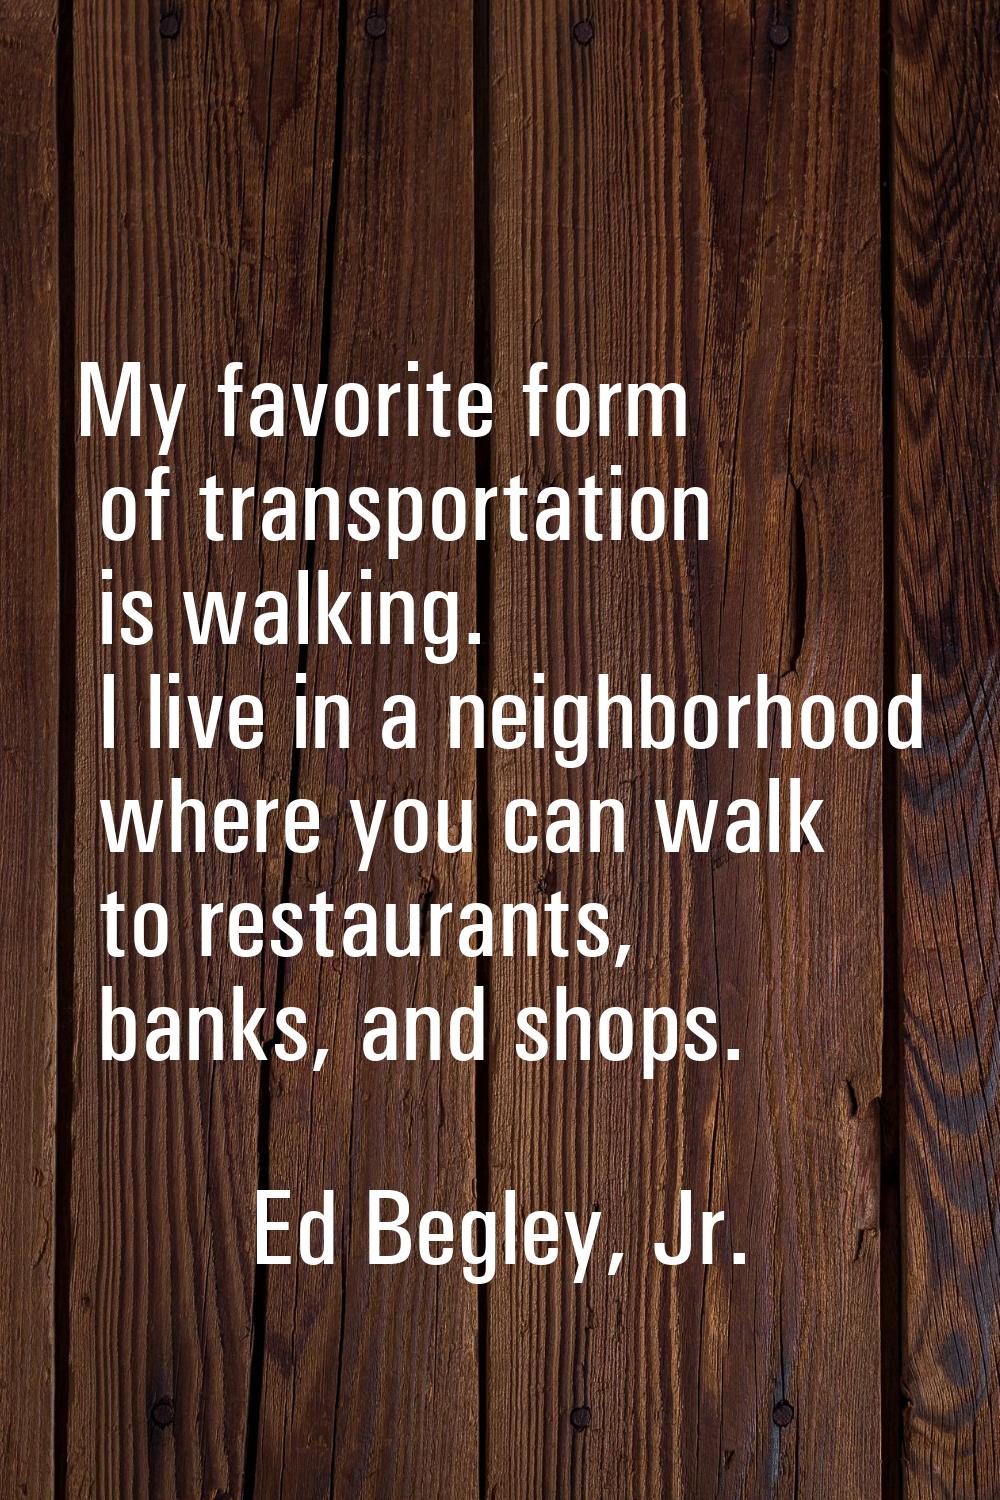 My favorite form of transportation is walking. I live in a neighborhood where you can walk to resta